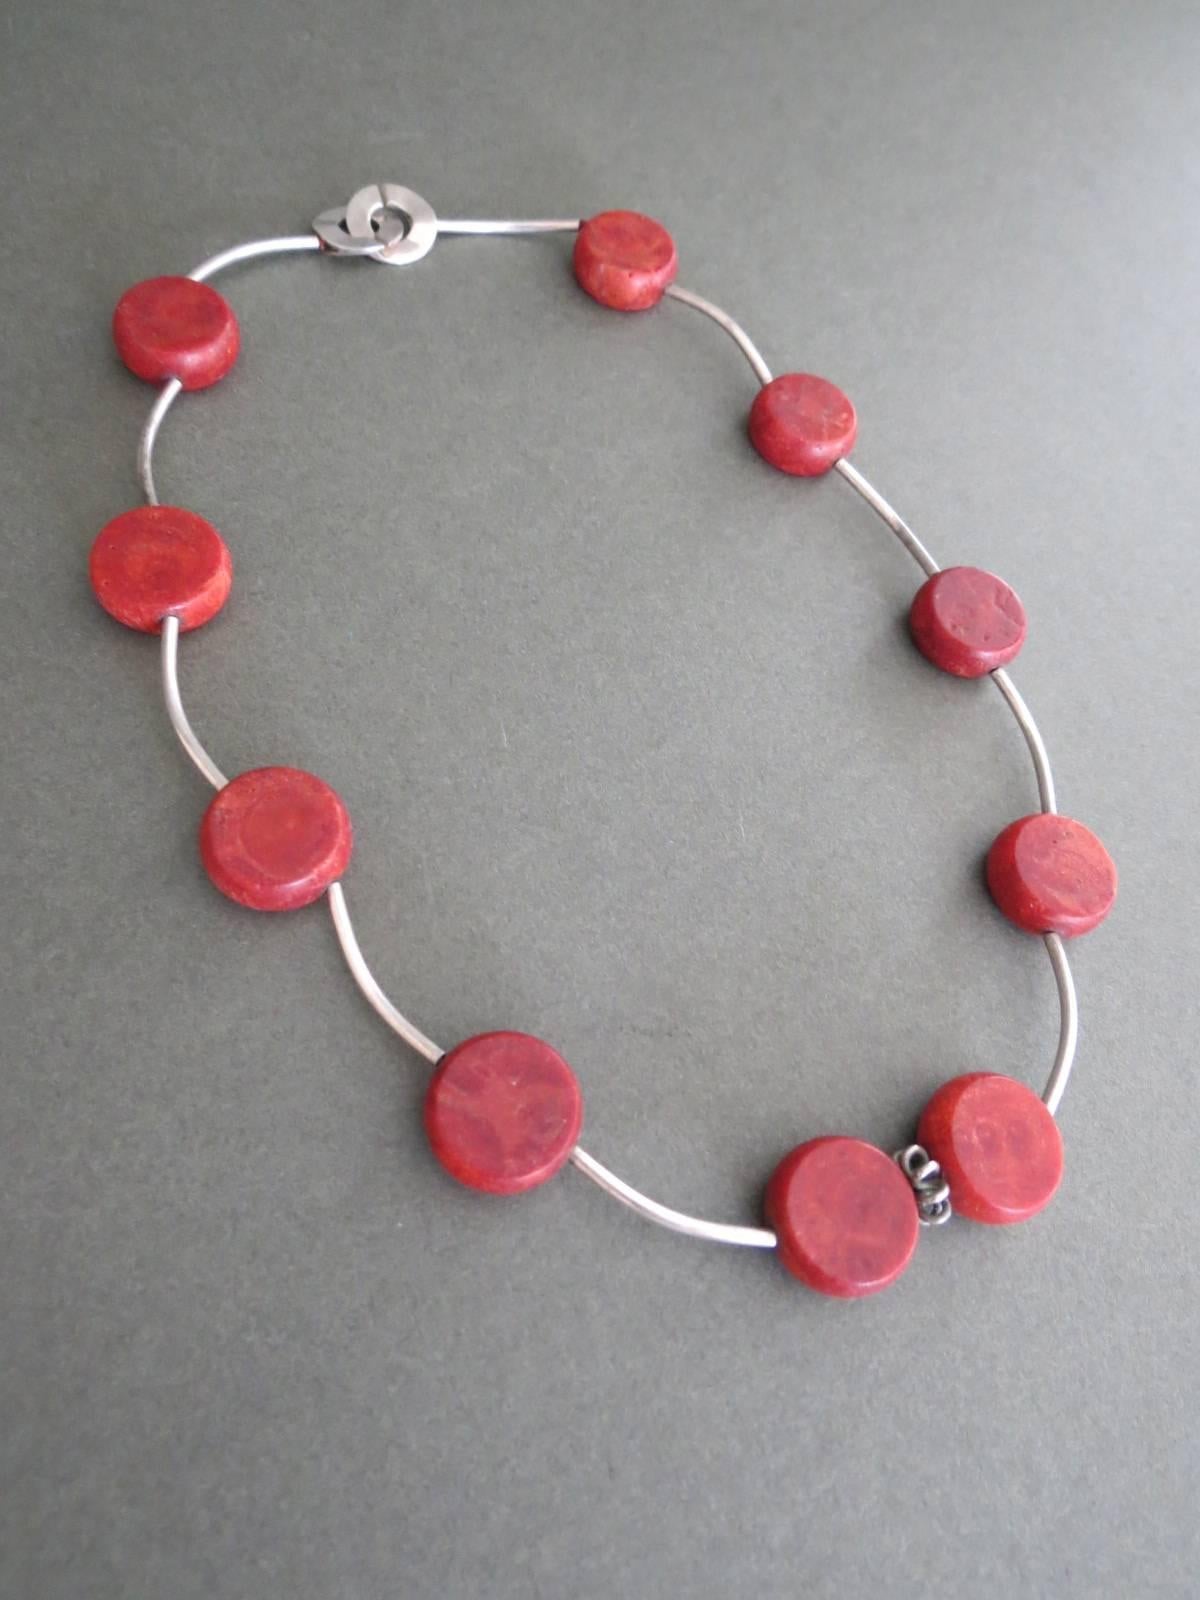 Vintage Sterling Silver Coral Mid Century Danish Necklace. Lovely condition and hallmarked.
Item Specifics
Length: 47cm (approx 18.50